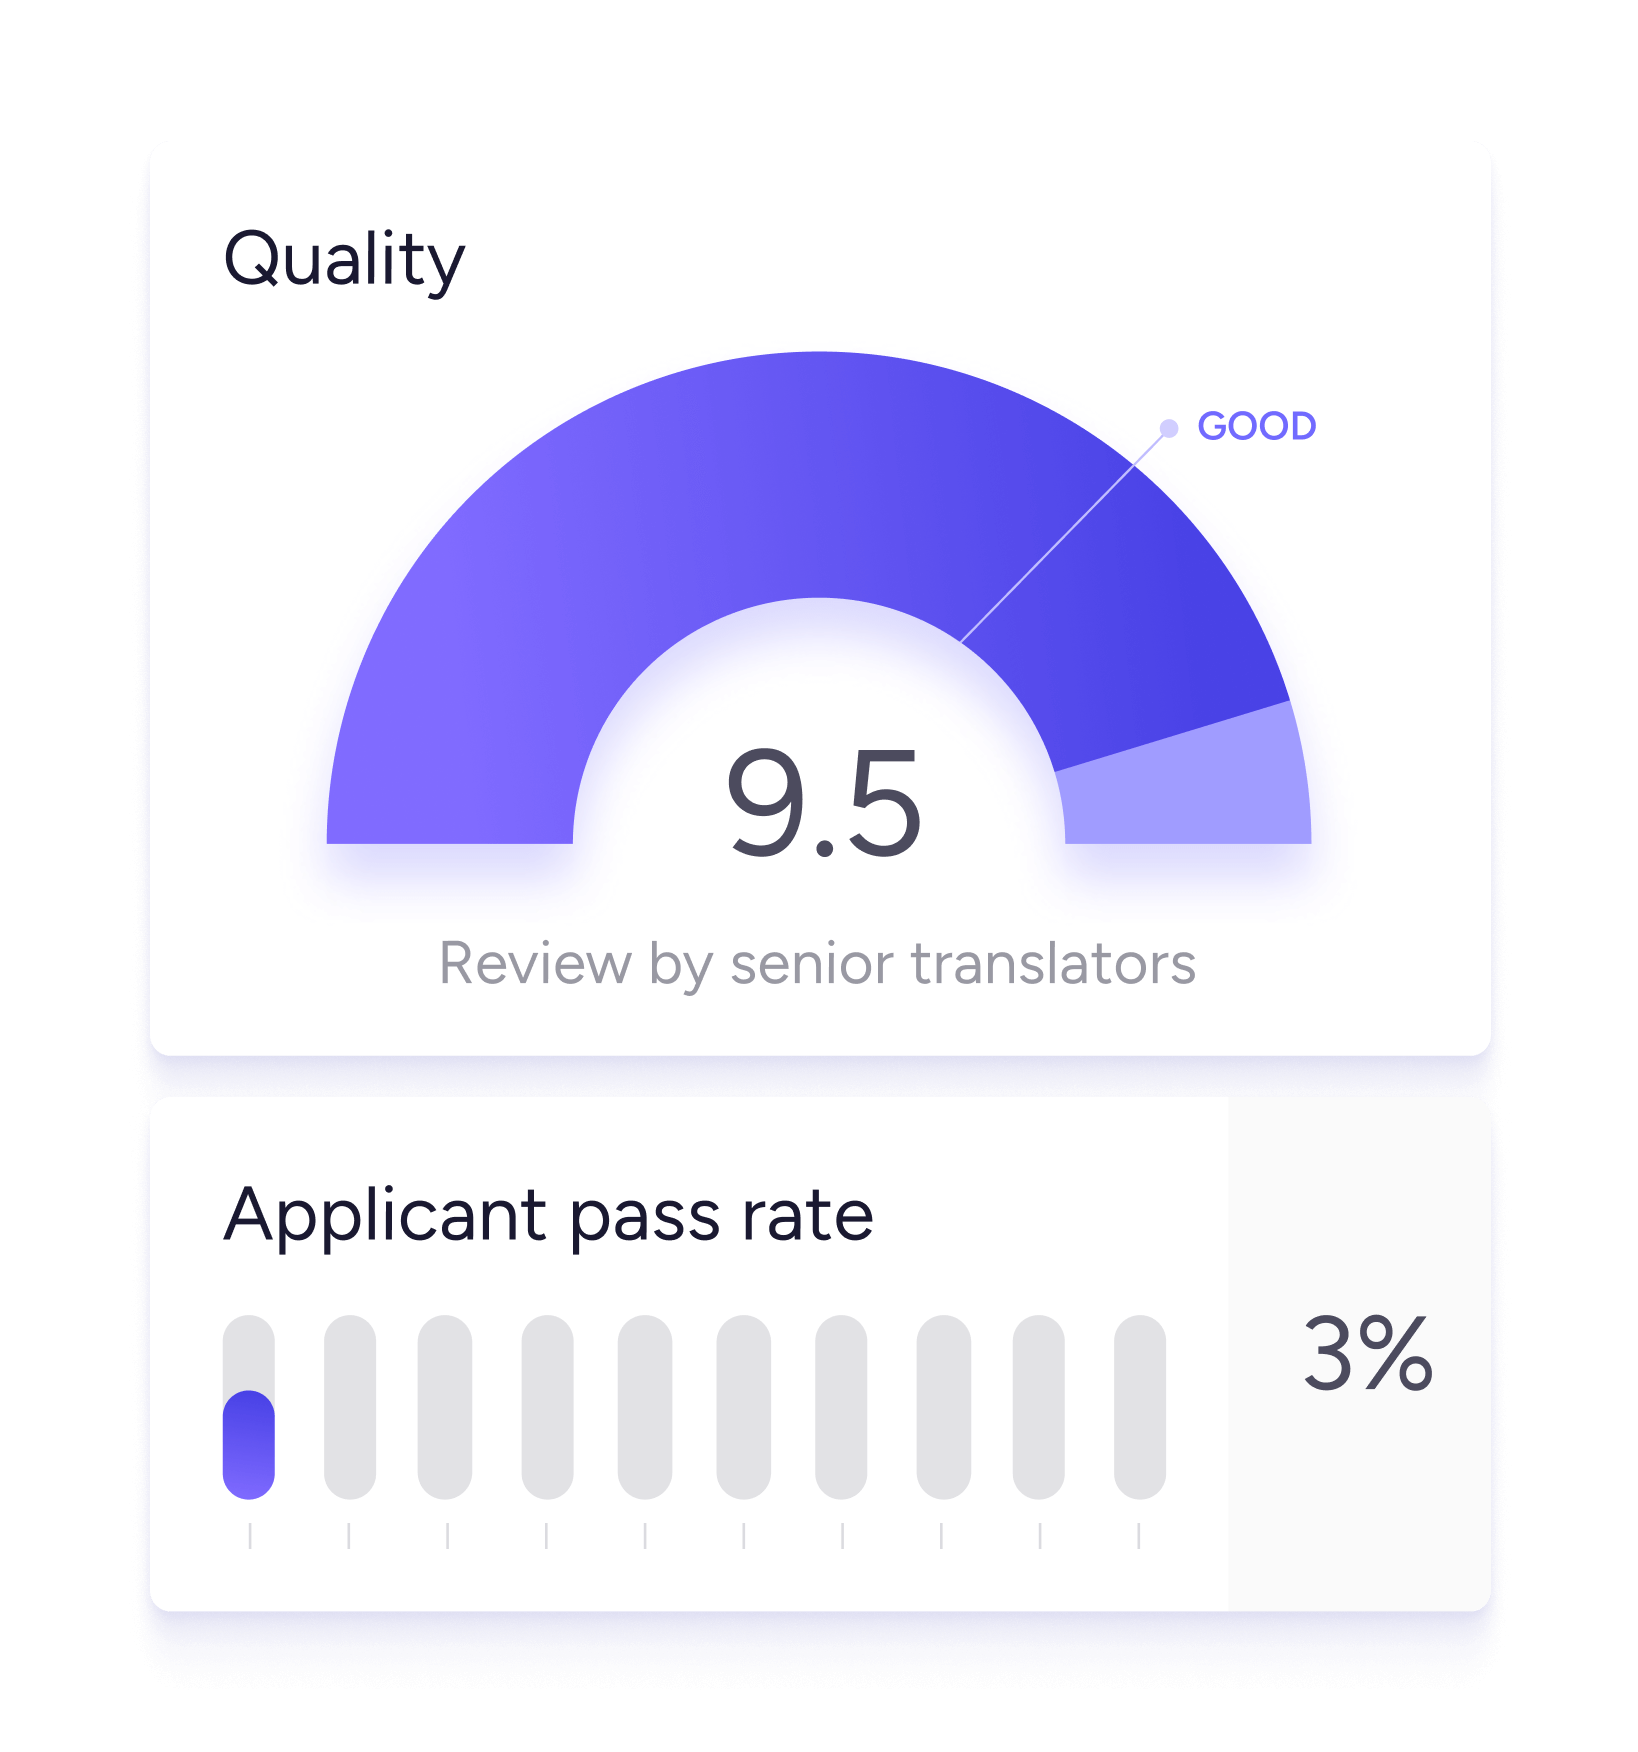 Hareword has the highest translation quality, 9.5 points. The applicant pass rate is only 3%.